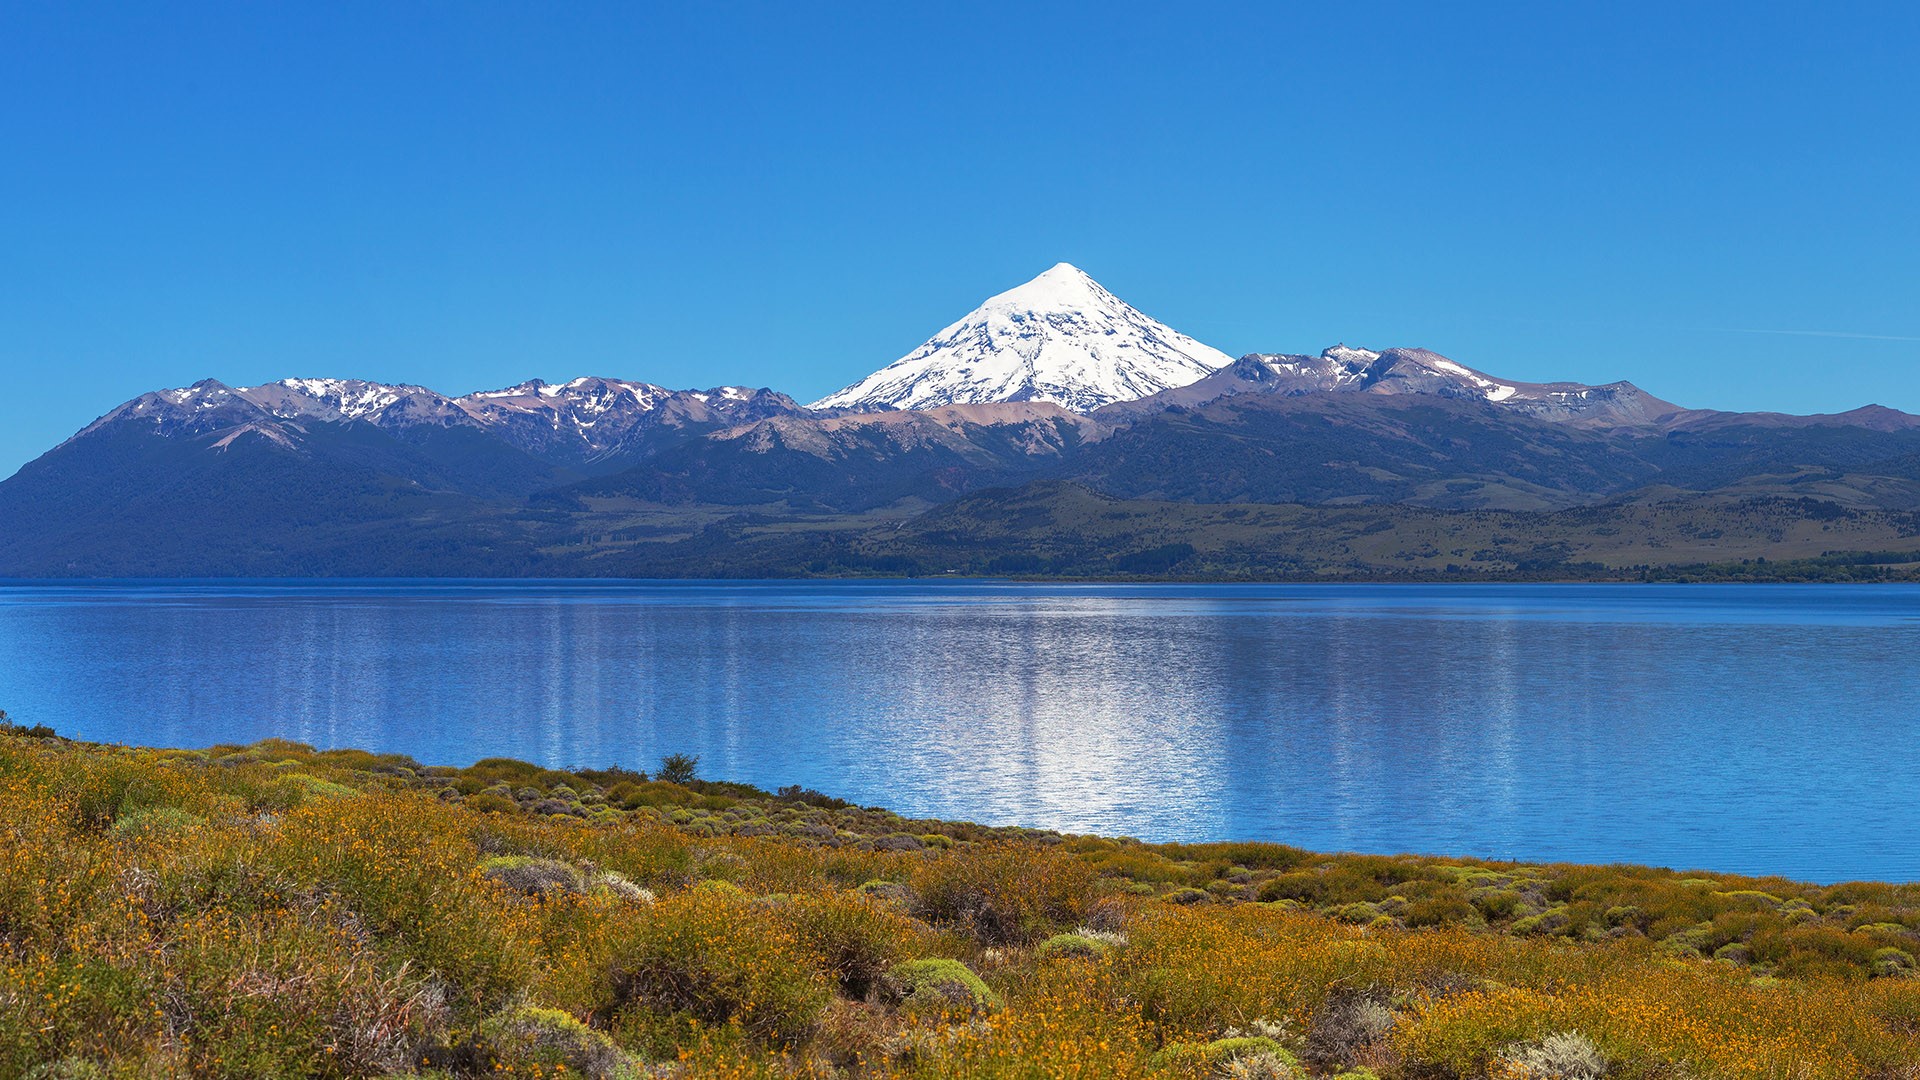 Mountains River Plants Nature Landscape Water Snowy Peak Clear Sky Far View Patagonia Argentina 1920x1080